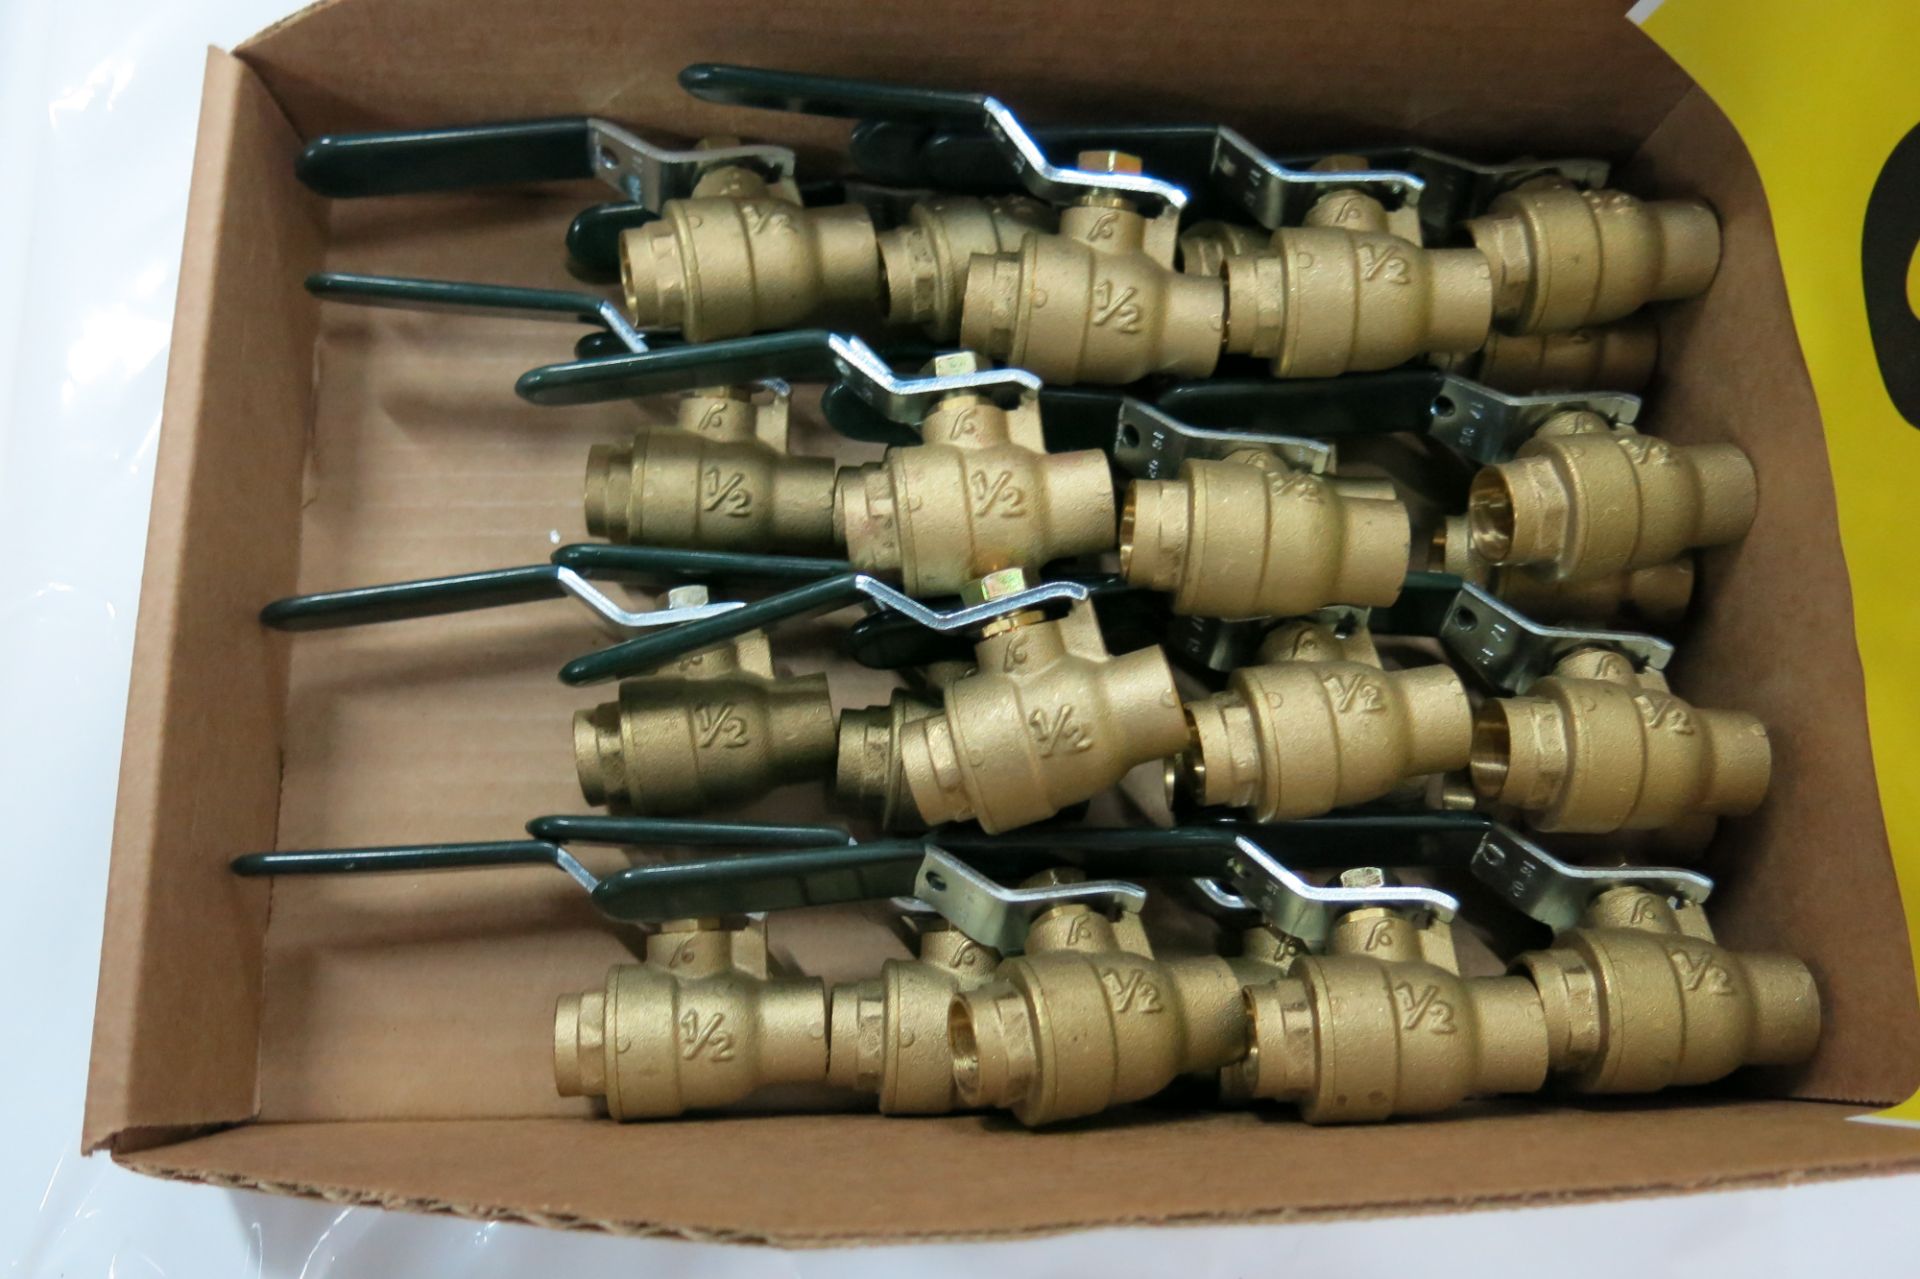 LOT OF JENKINS, 202J, 1/2", BALL VALVES - NEW (LOCATED IN SCARBOROUGH) - Image 2 of 2